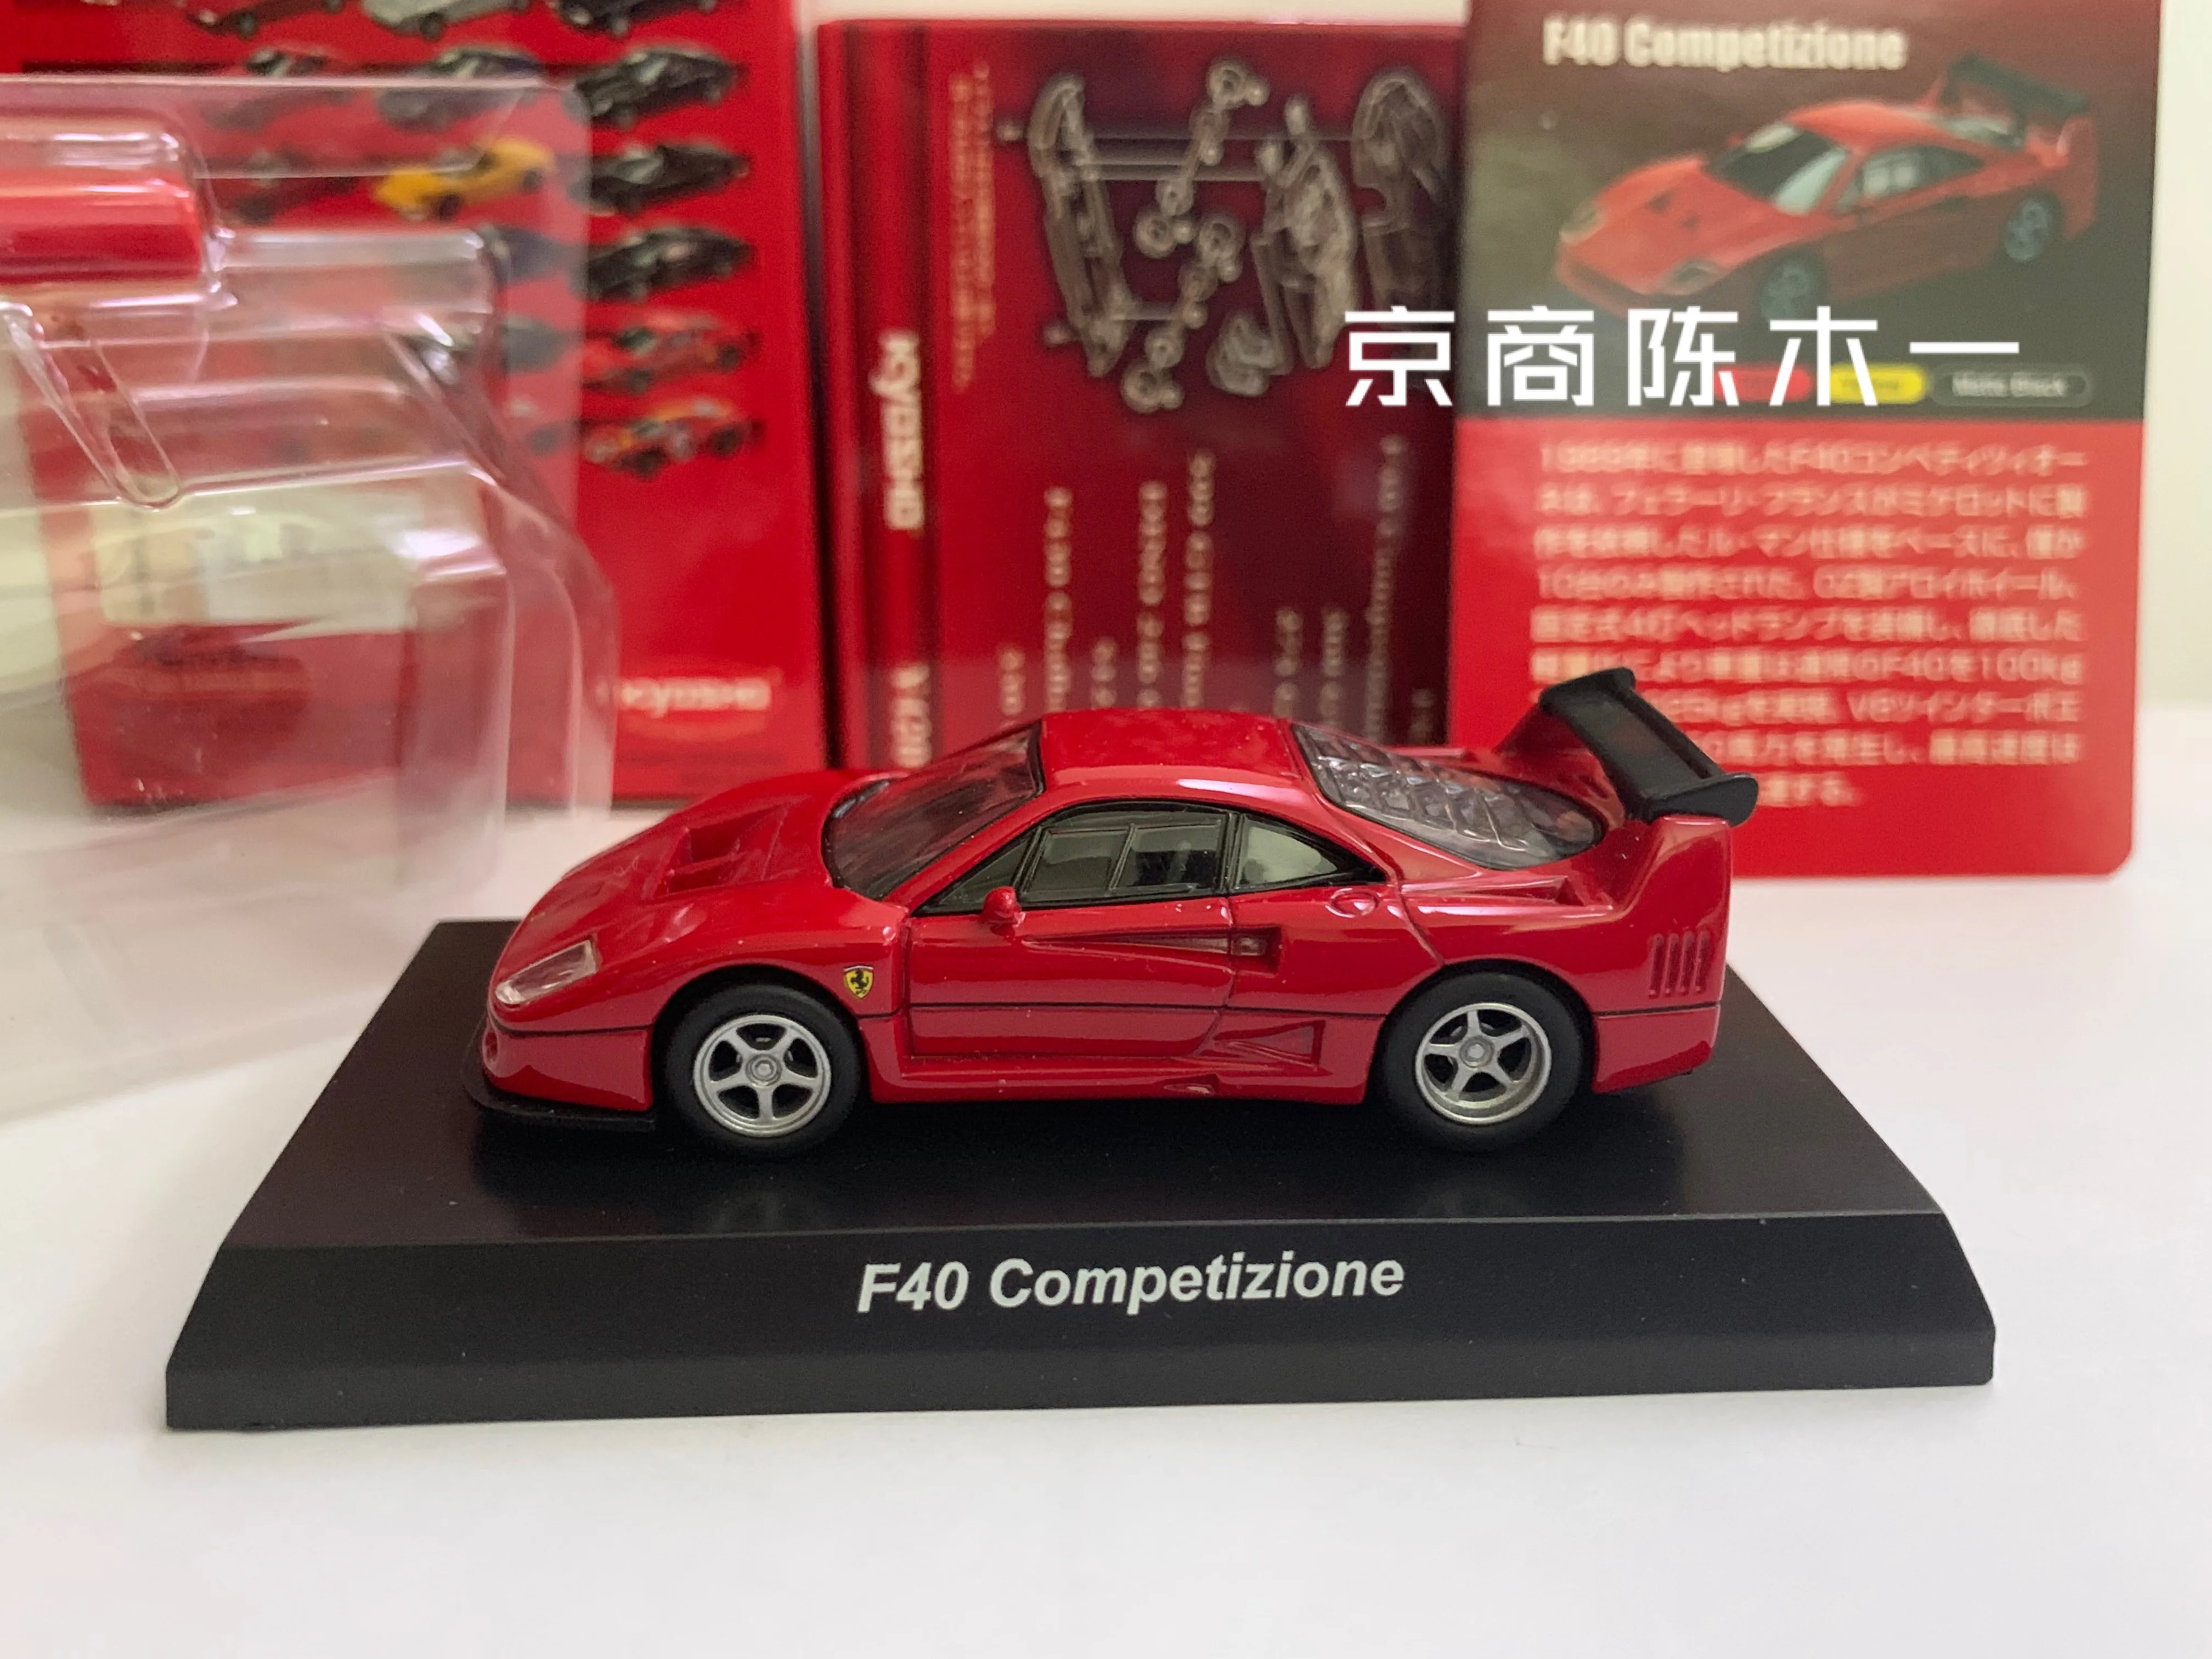 

1/64 KYOSHO F40 Competizione Collection of die-cast alloy car decoration model toys